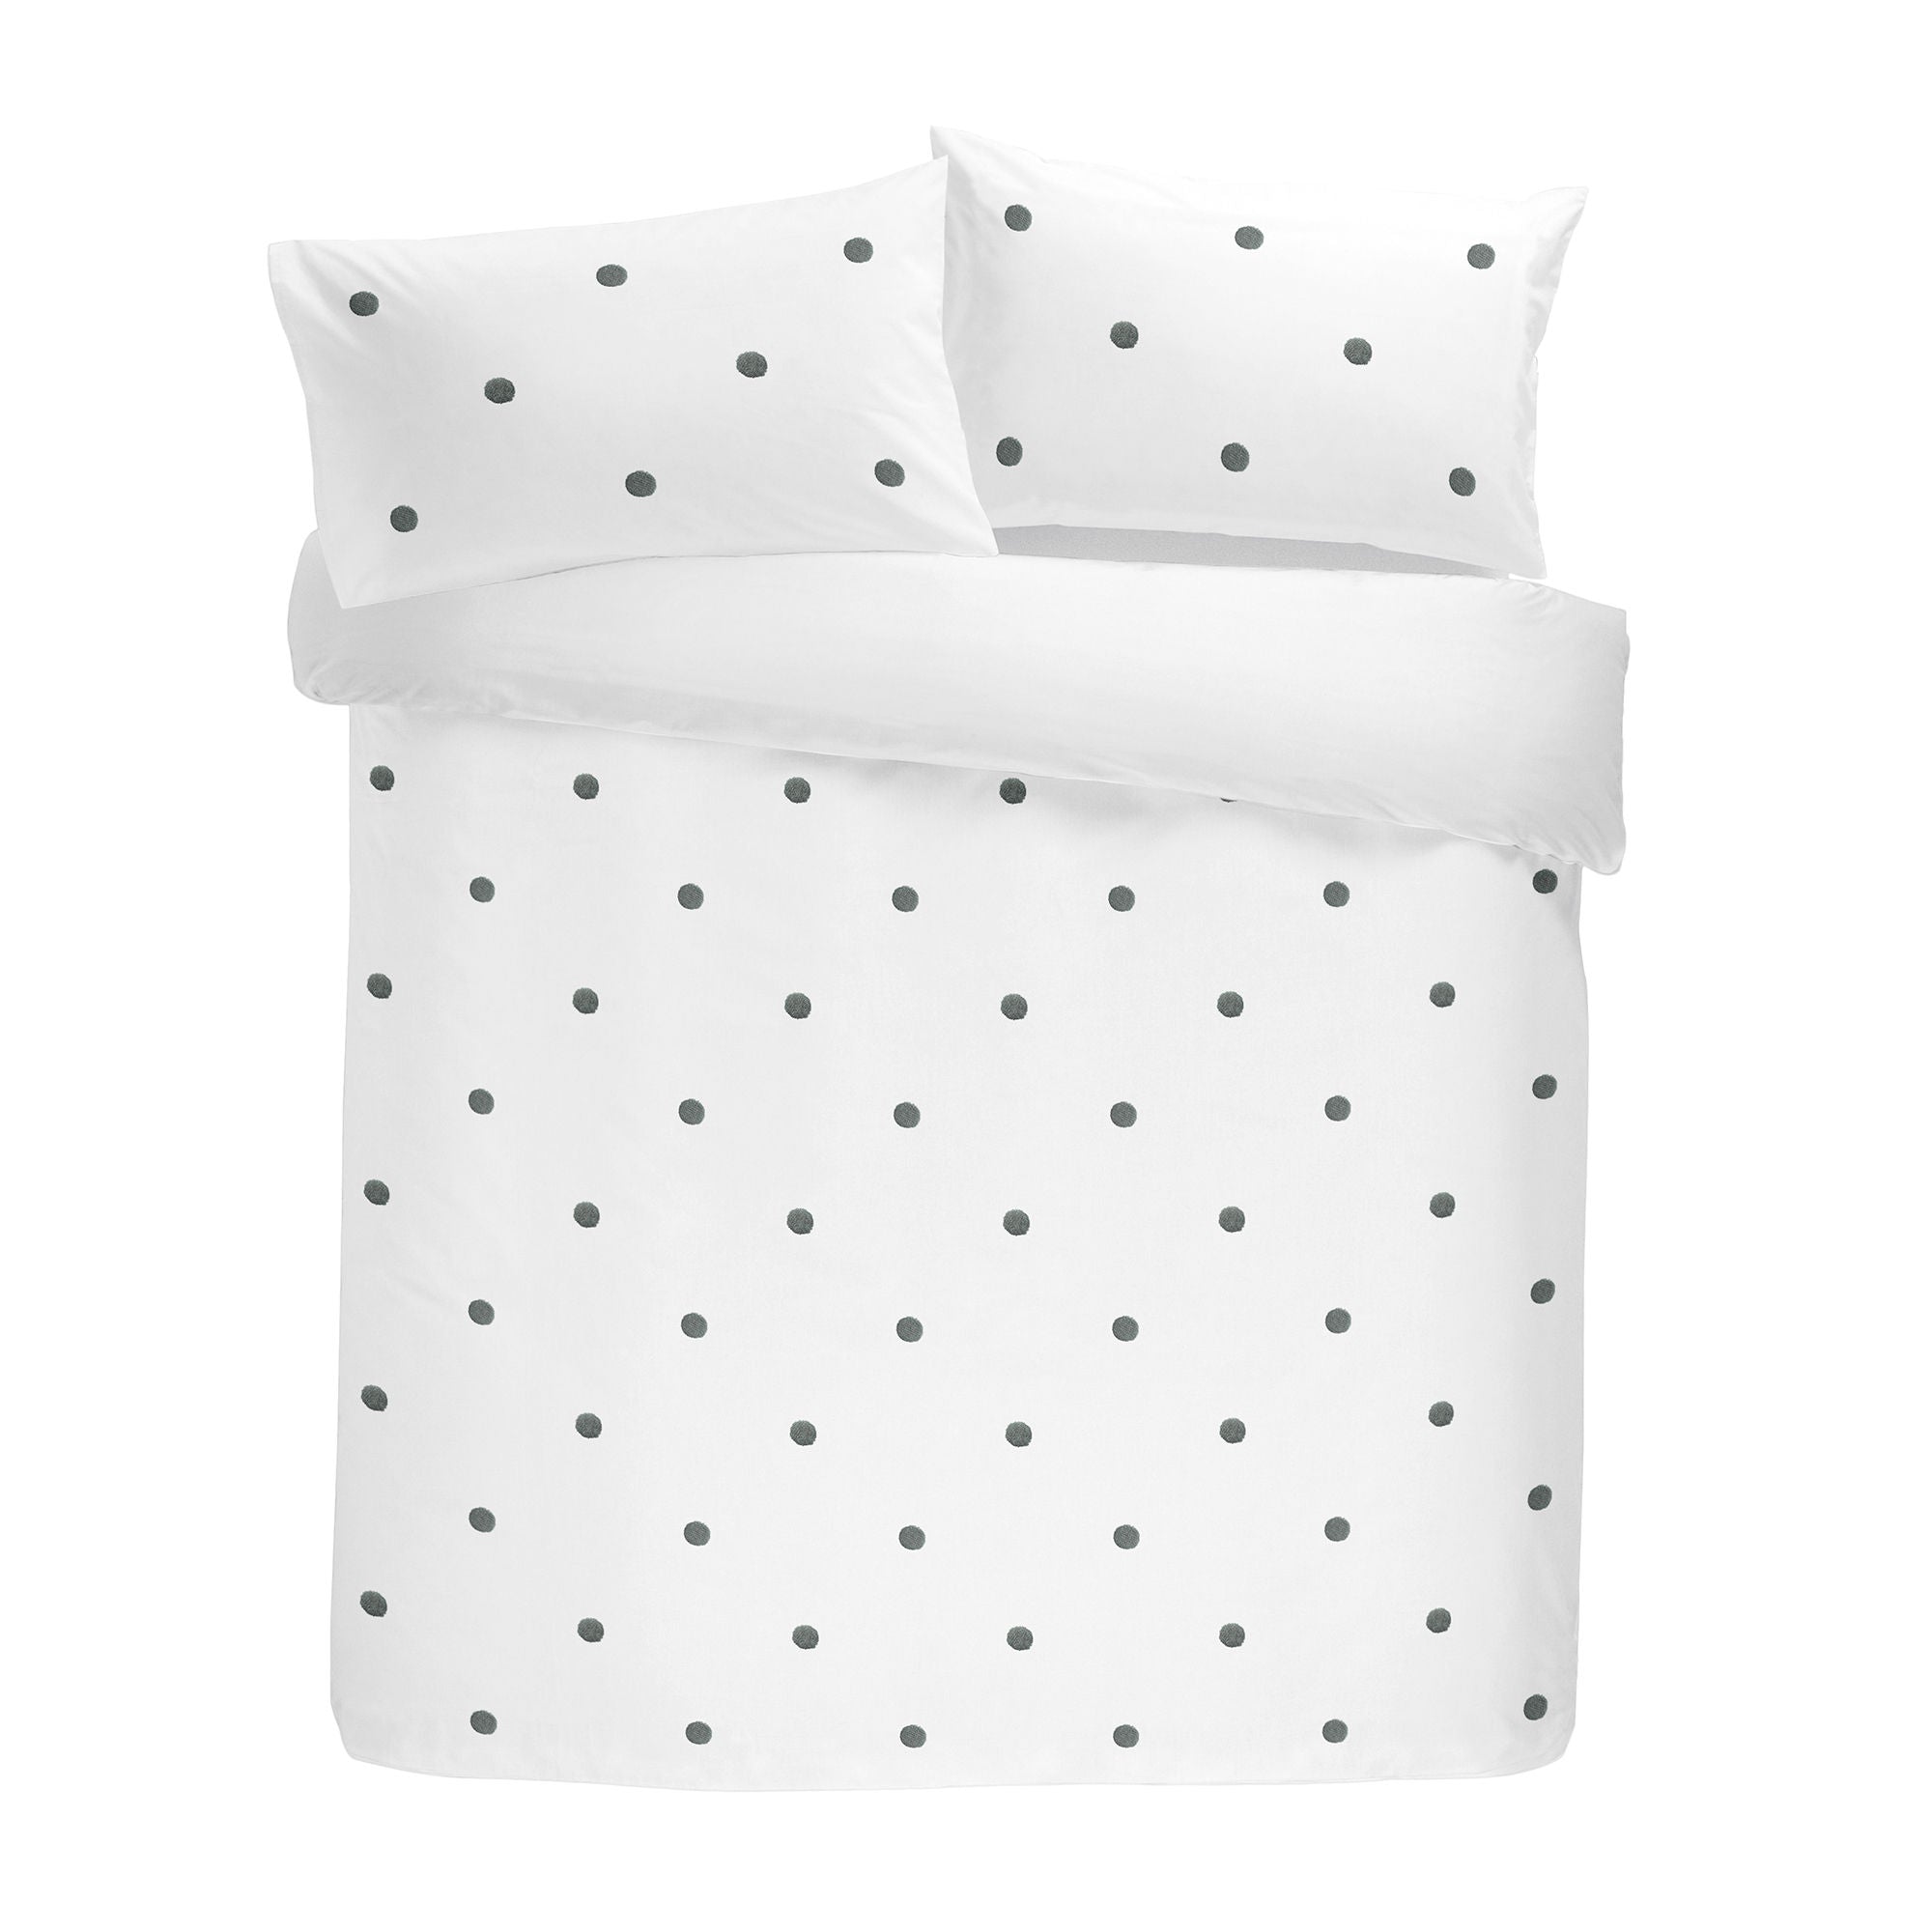 Dot Garden Duvet Cover Set by Appletree Boutique in White with Slate Dots - Duvet Cover Set - Appletree Boutique